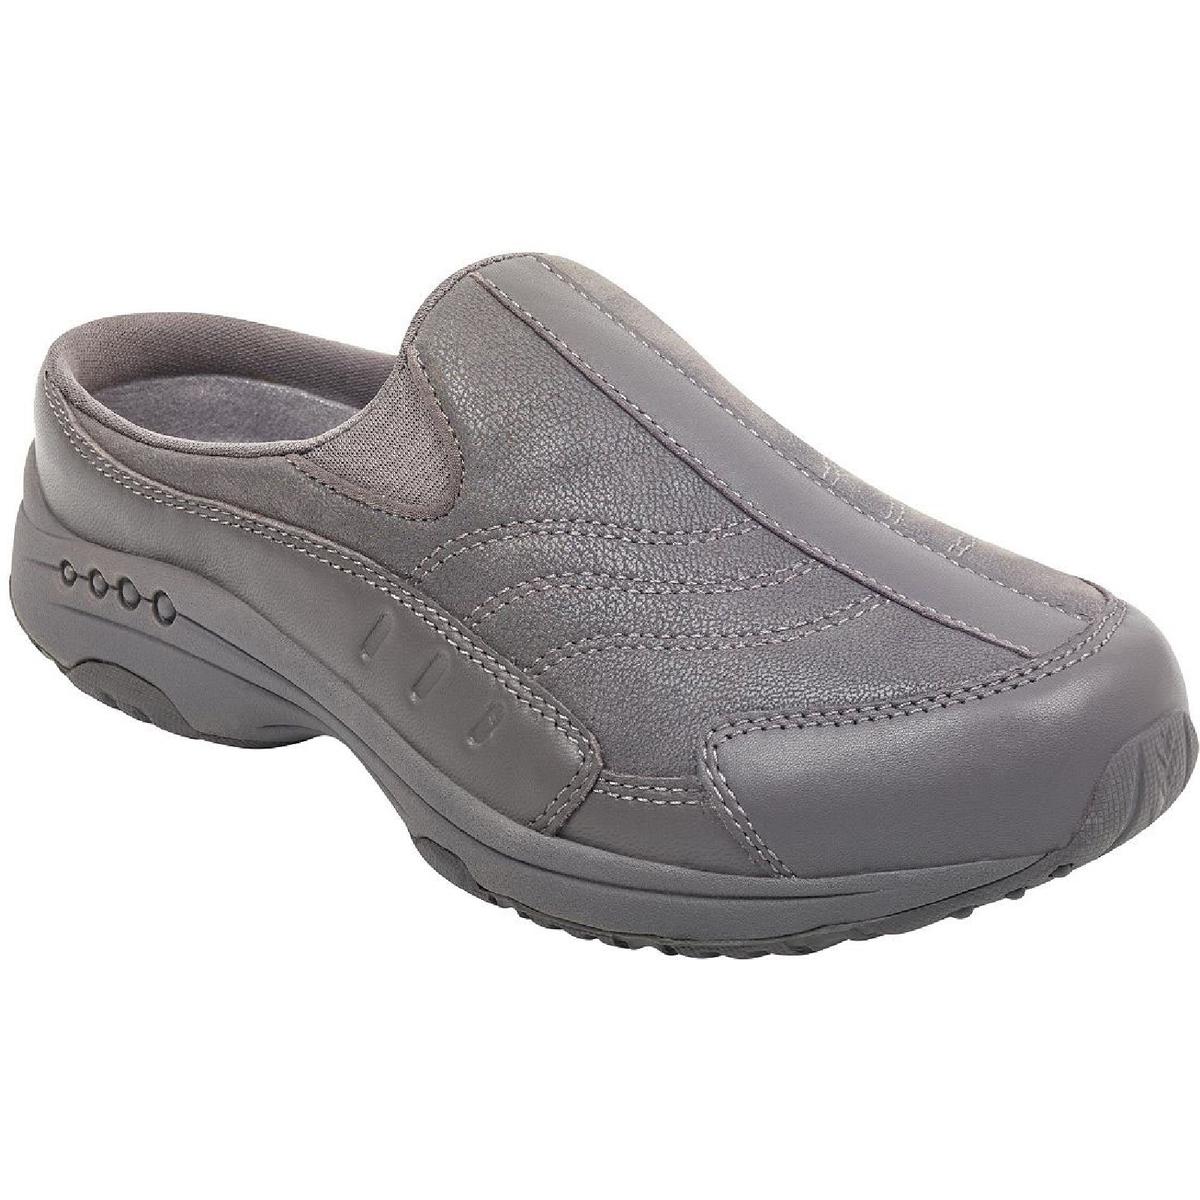 Easy Spirit Womens Travel Time 234 Leather Comfort Insole Clogs Shoes BHFO 3127 WT10995